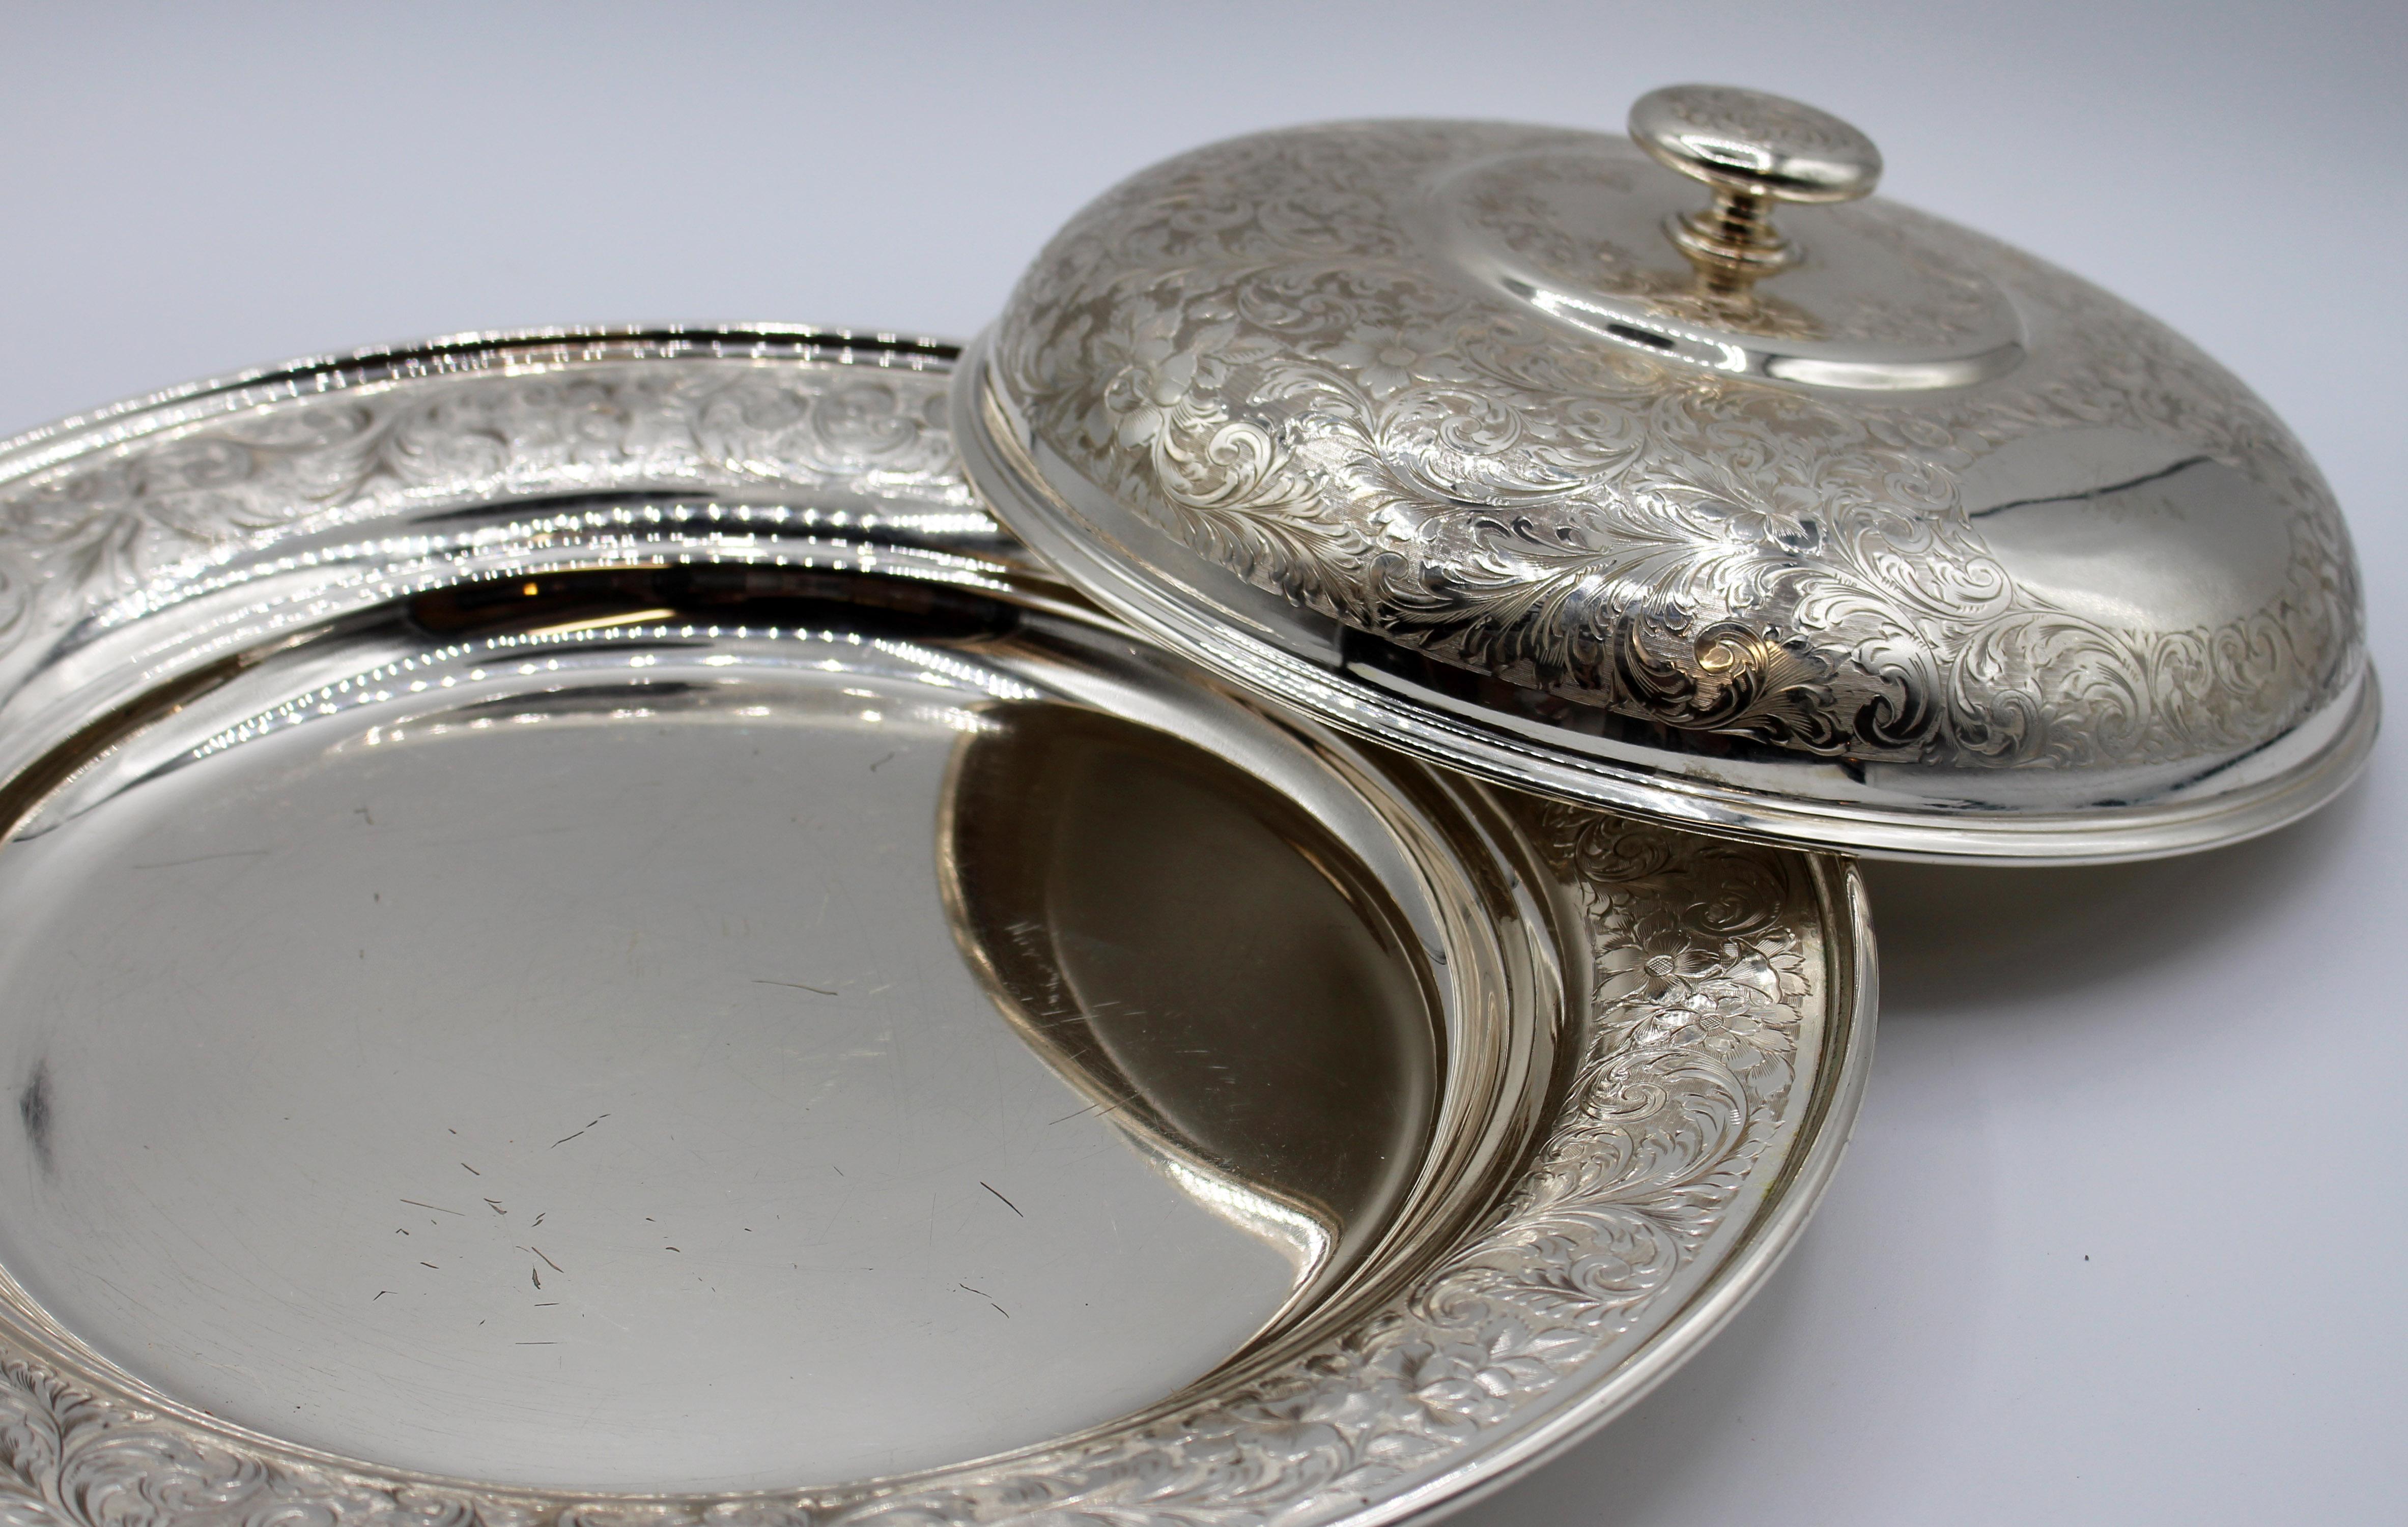 1903-1930 sterling silver covered serving tray, Birks, Canadian. A superb example. With the rare Birks mark of a beaver, a lion & a S for sterling. Marked 